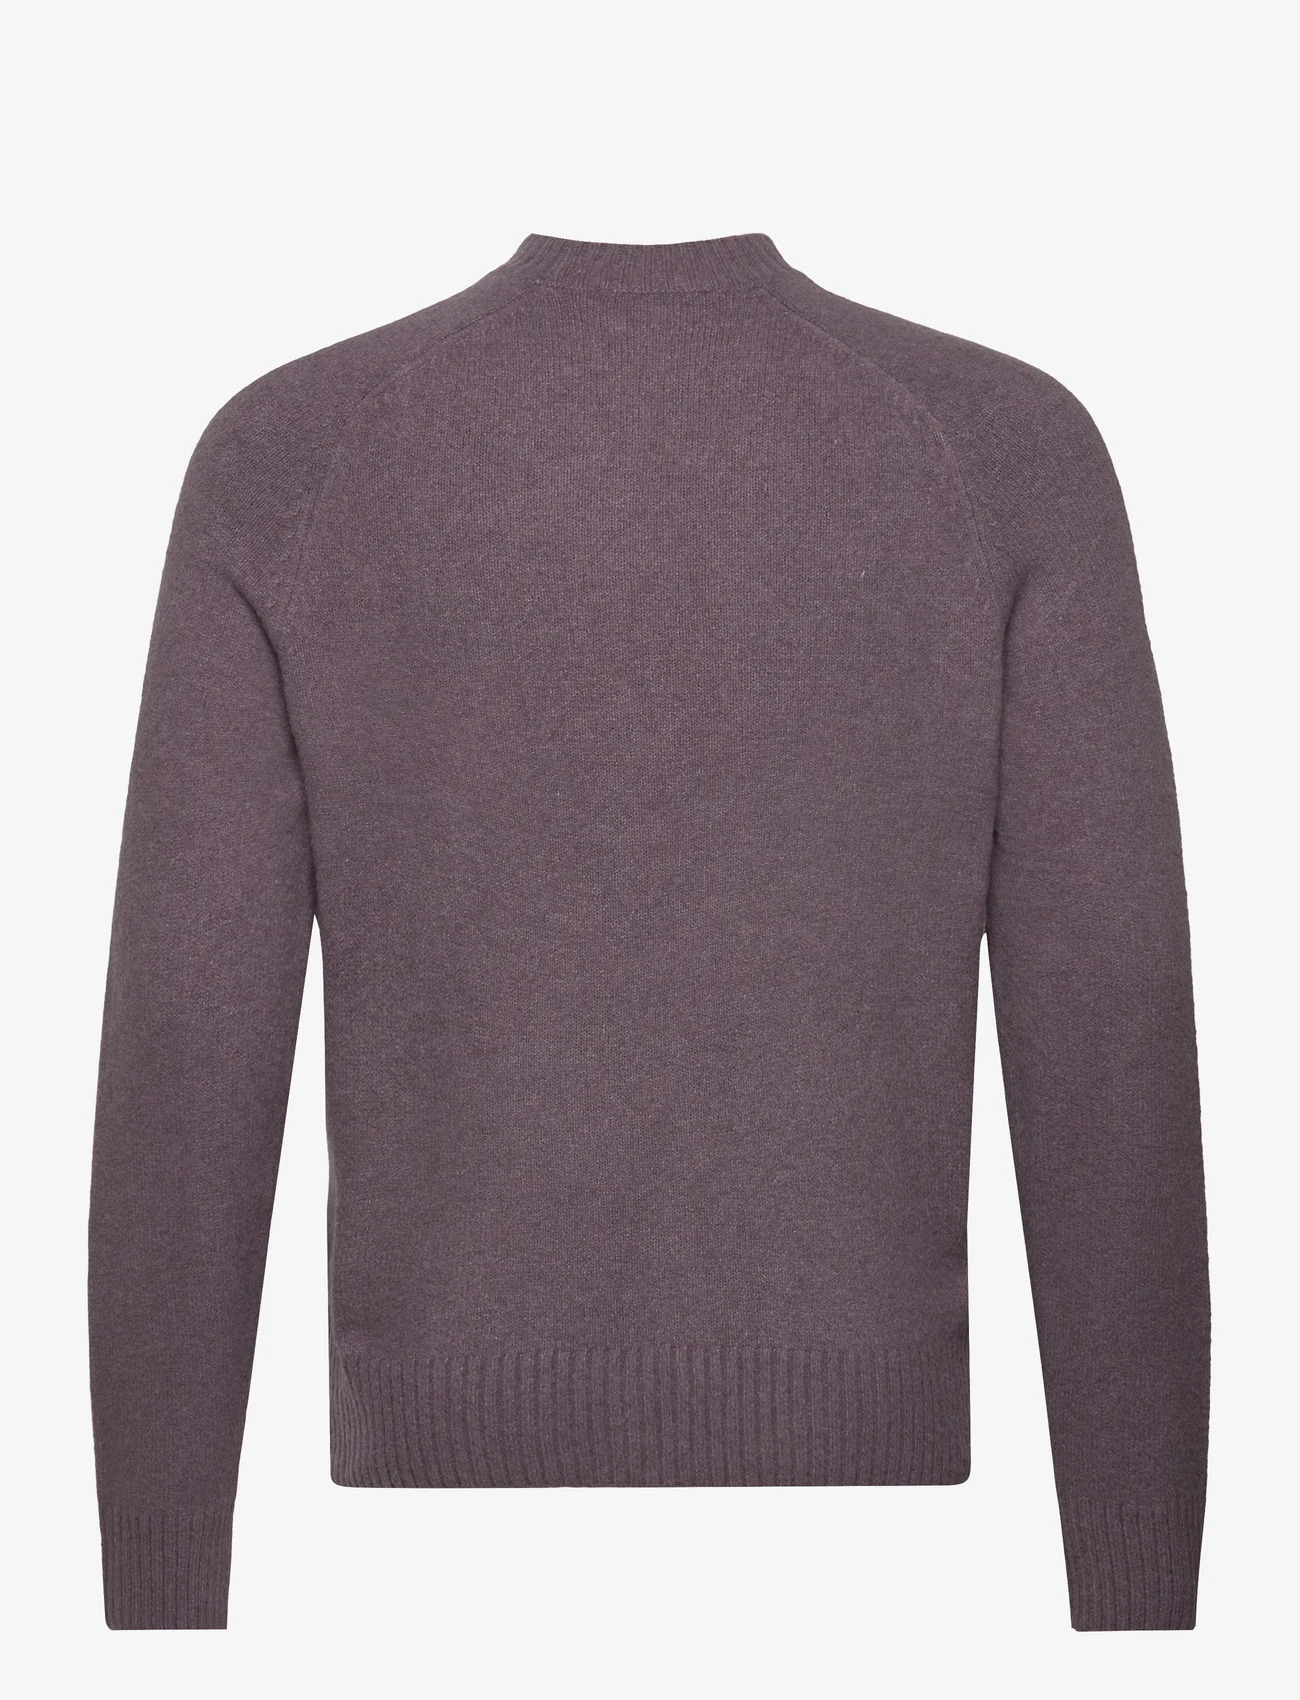 Mango - Knitted sweater with ribbed details - rund hals - lt-pastel purple - 1